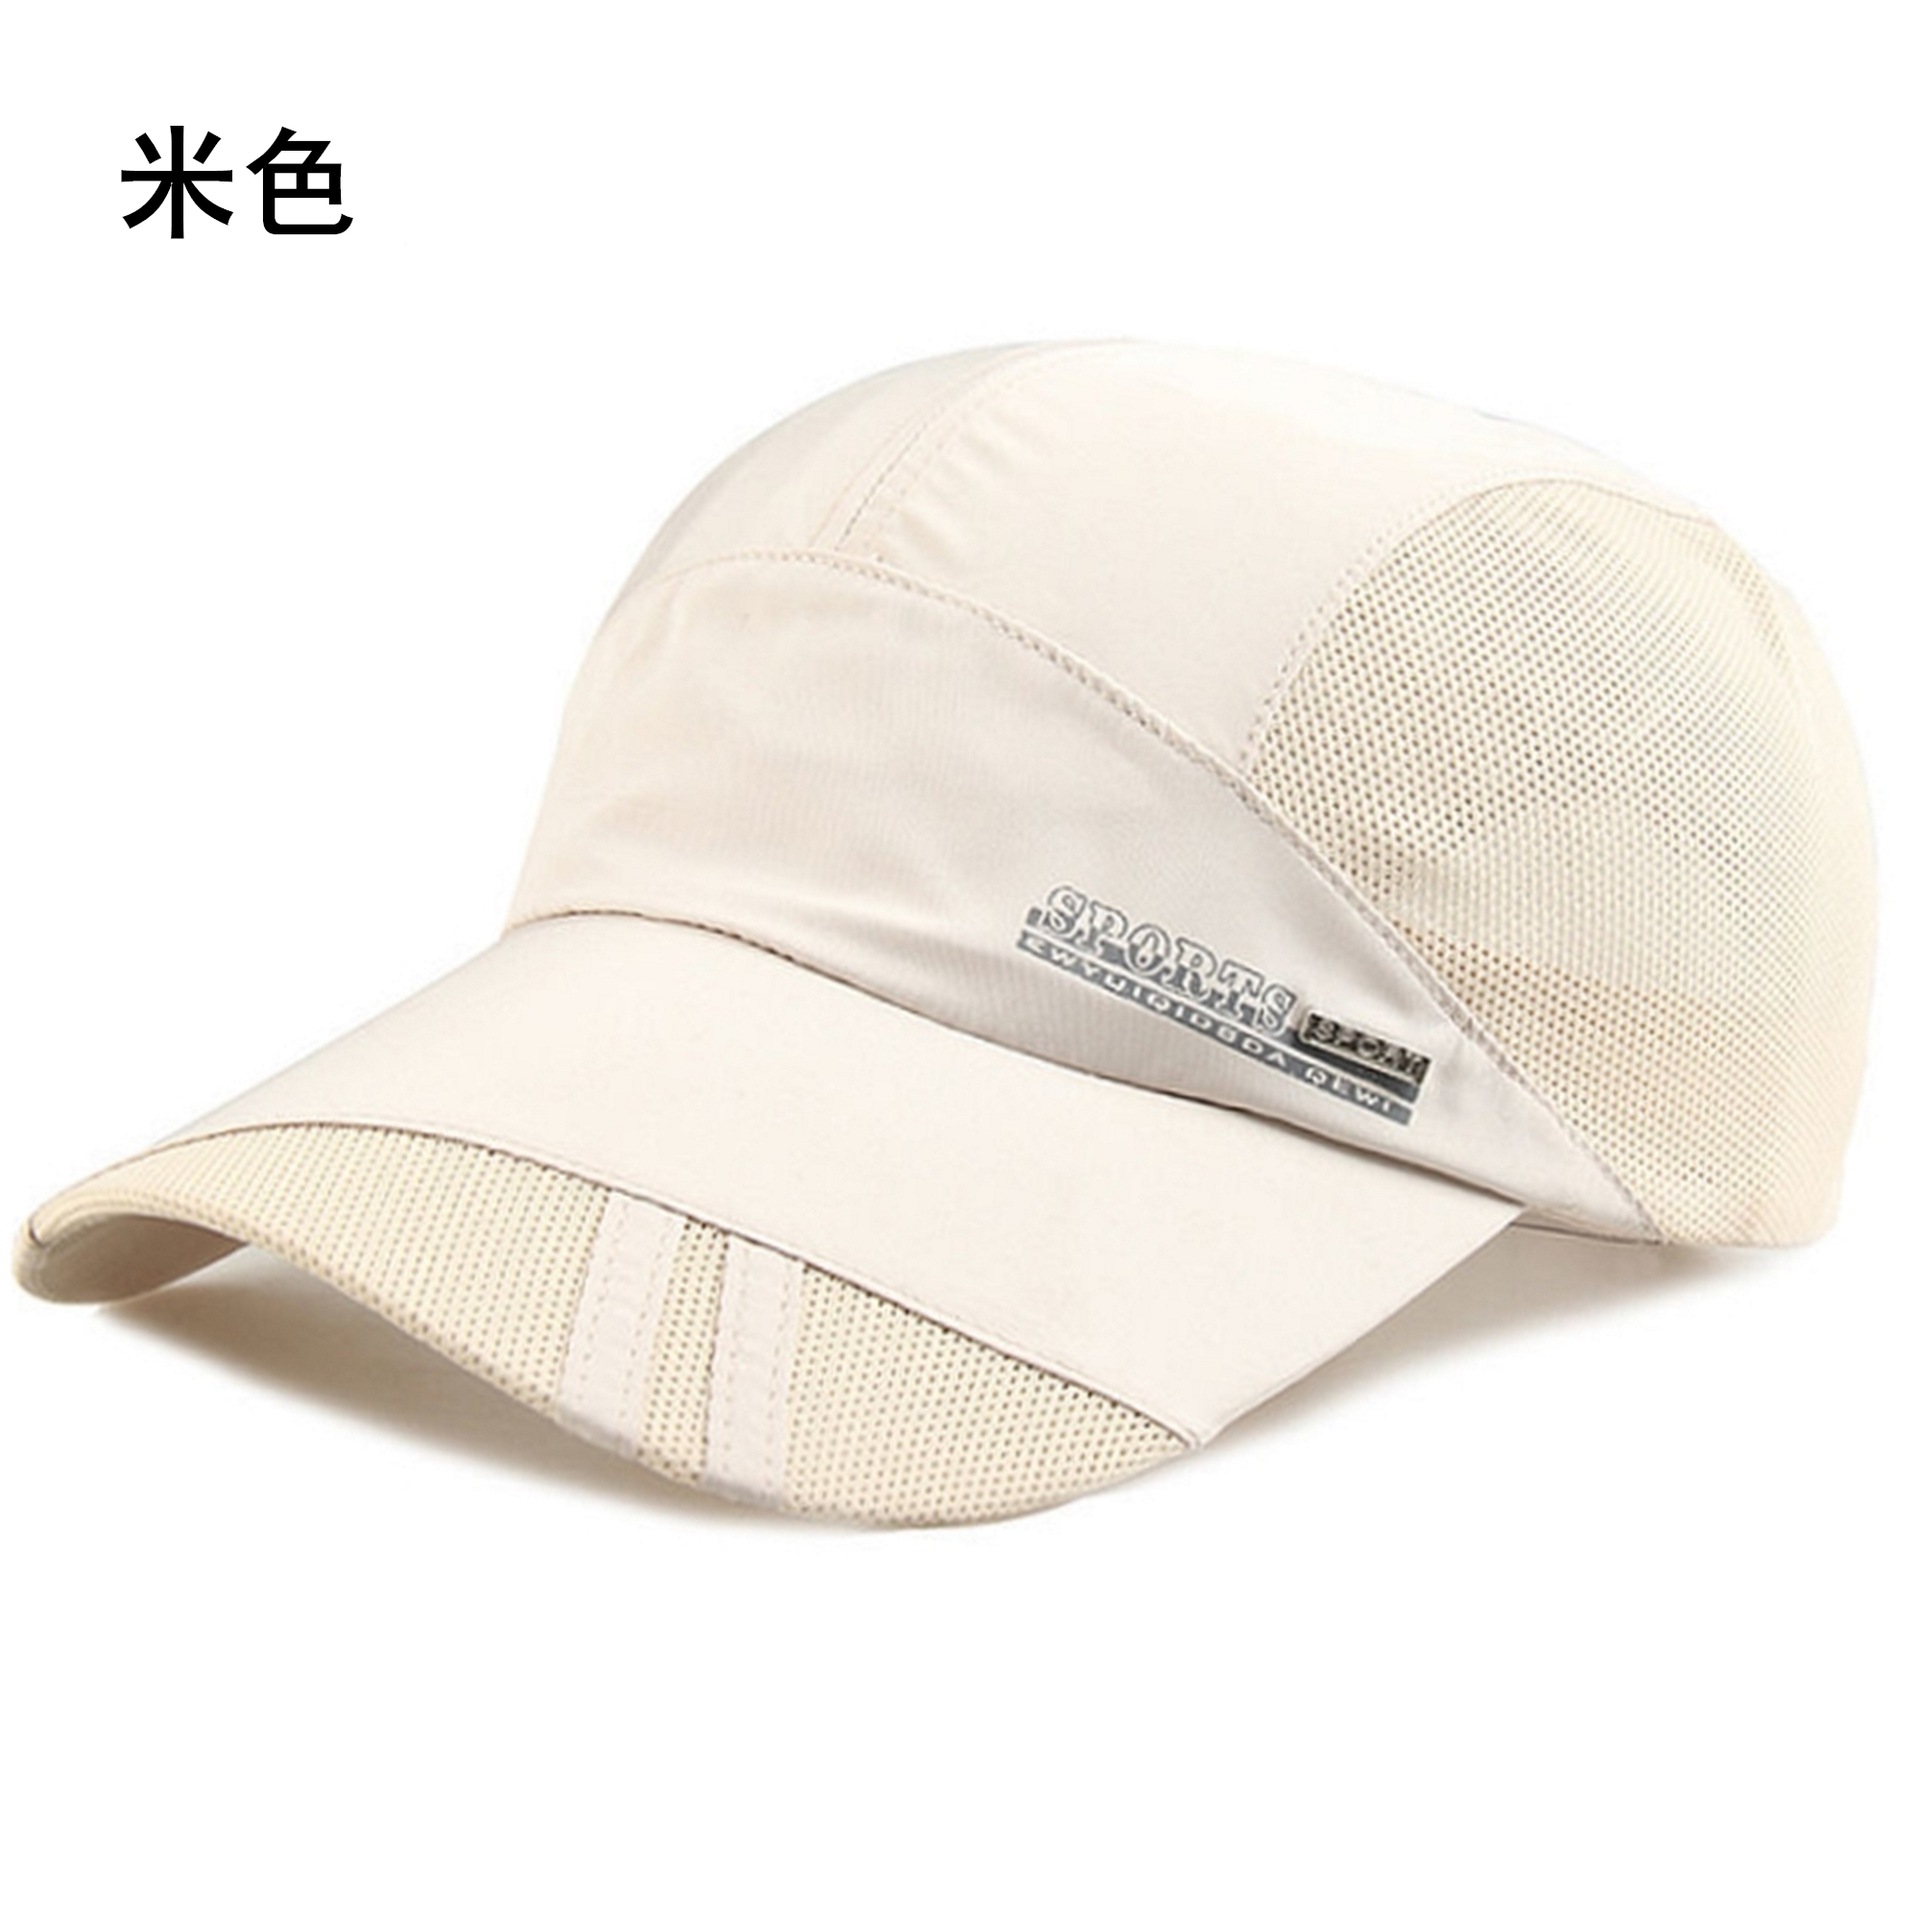 Hat Men's Spring and Summer Lightweight Sun-Proof Peaked Cap Breathable Outdoor Leisure Fishing Sun-Proof Baseball Sun Hat